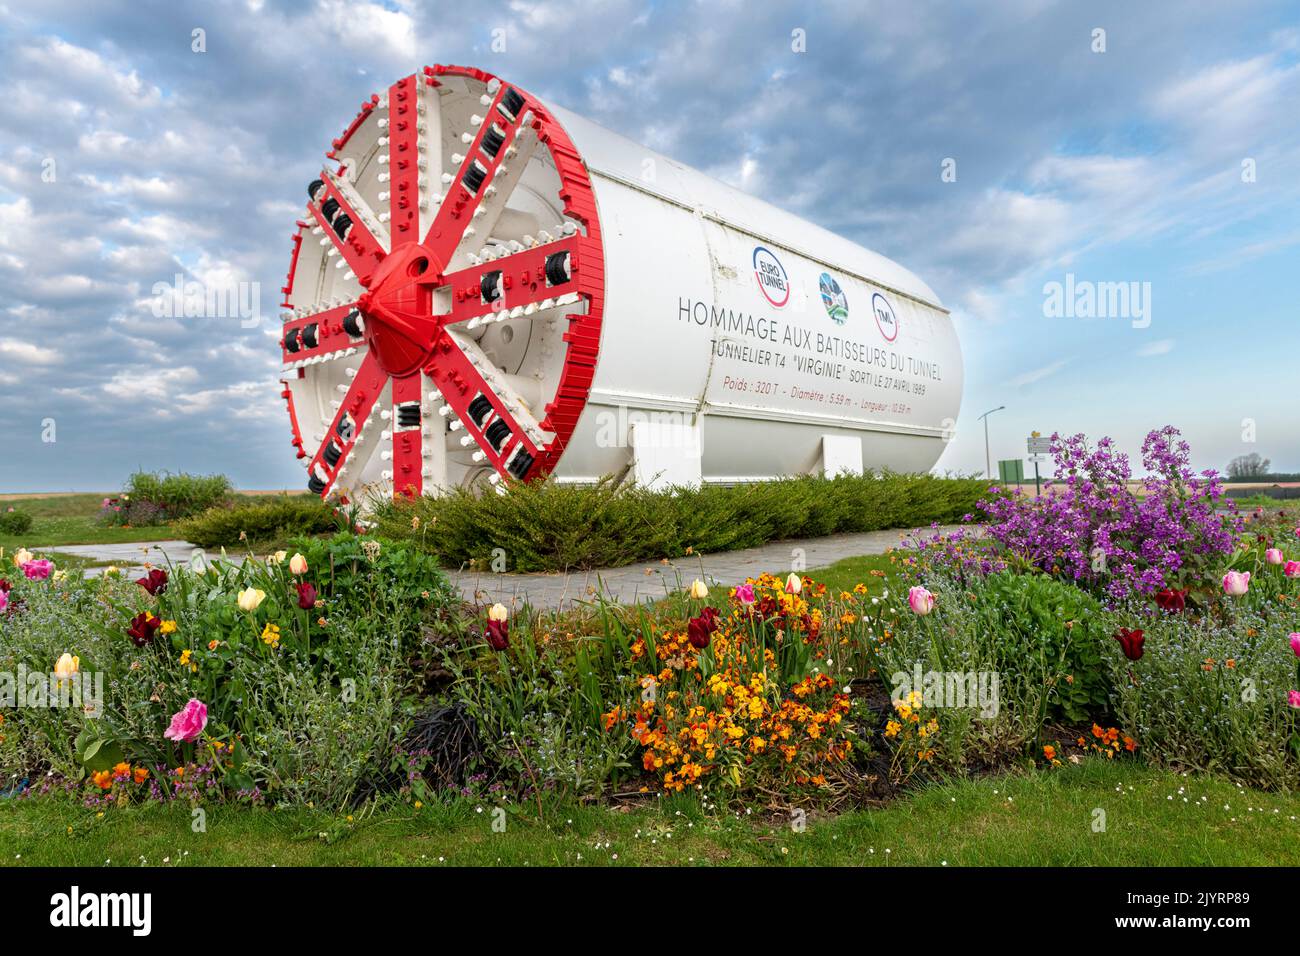 Tunnel boring machine used to dig the Channel Tunnel, spring, Coquelles, Pas-de-Calais, France Stock Photo